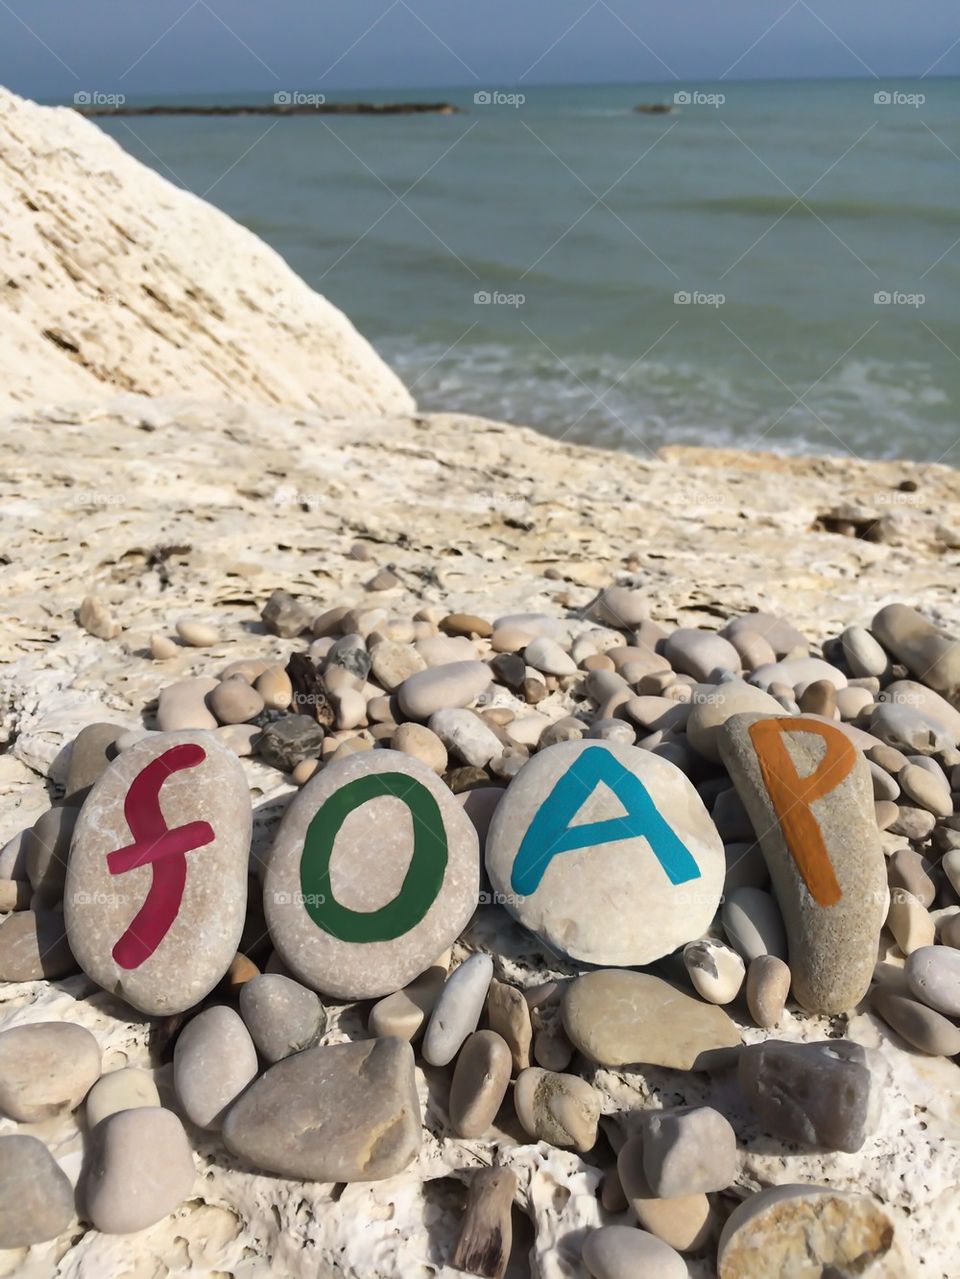 Foap,word on colored stone letters